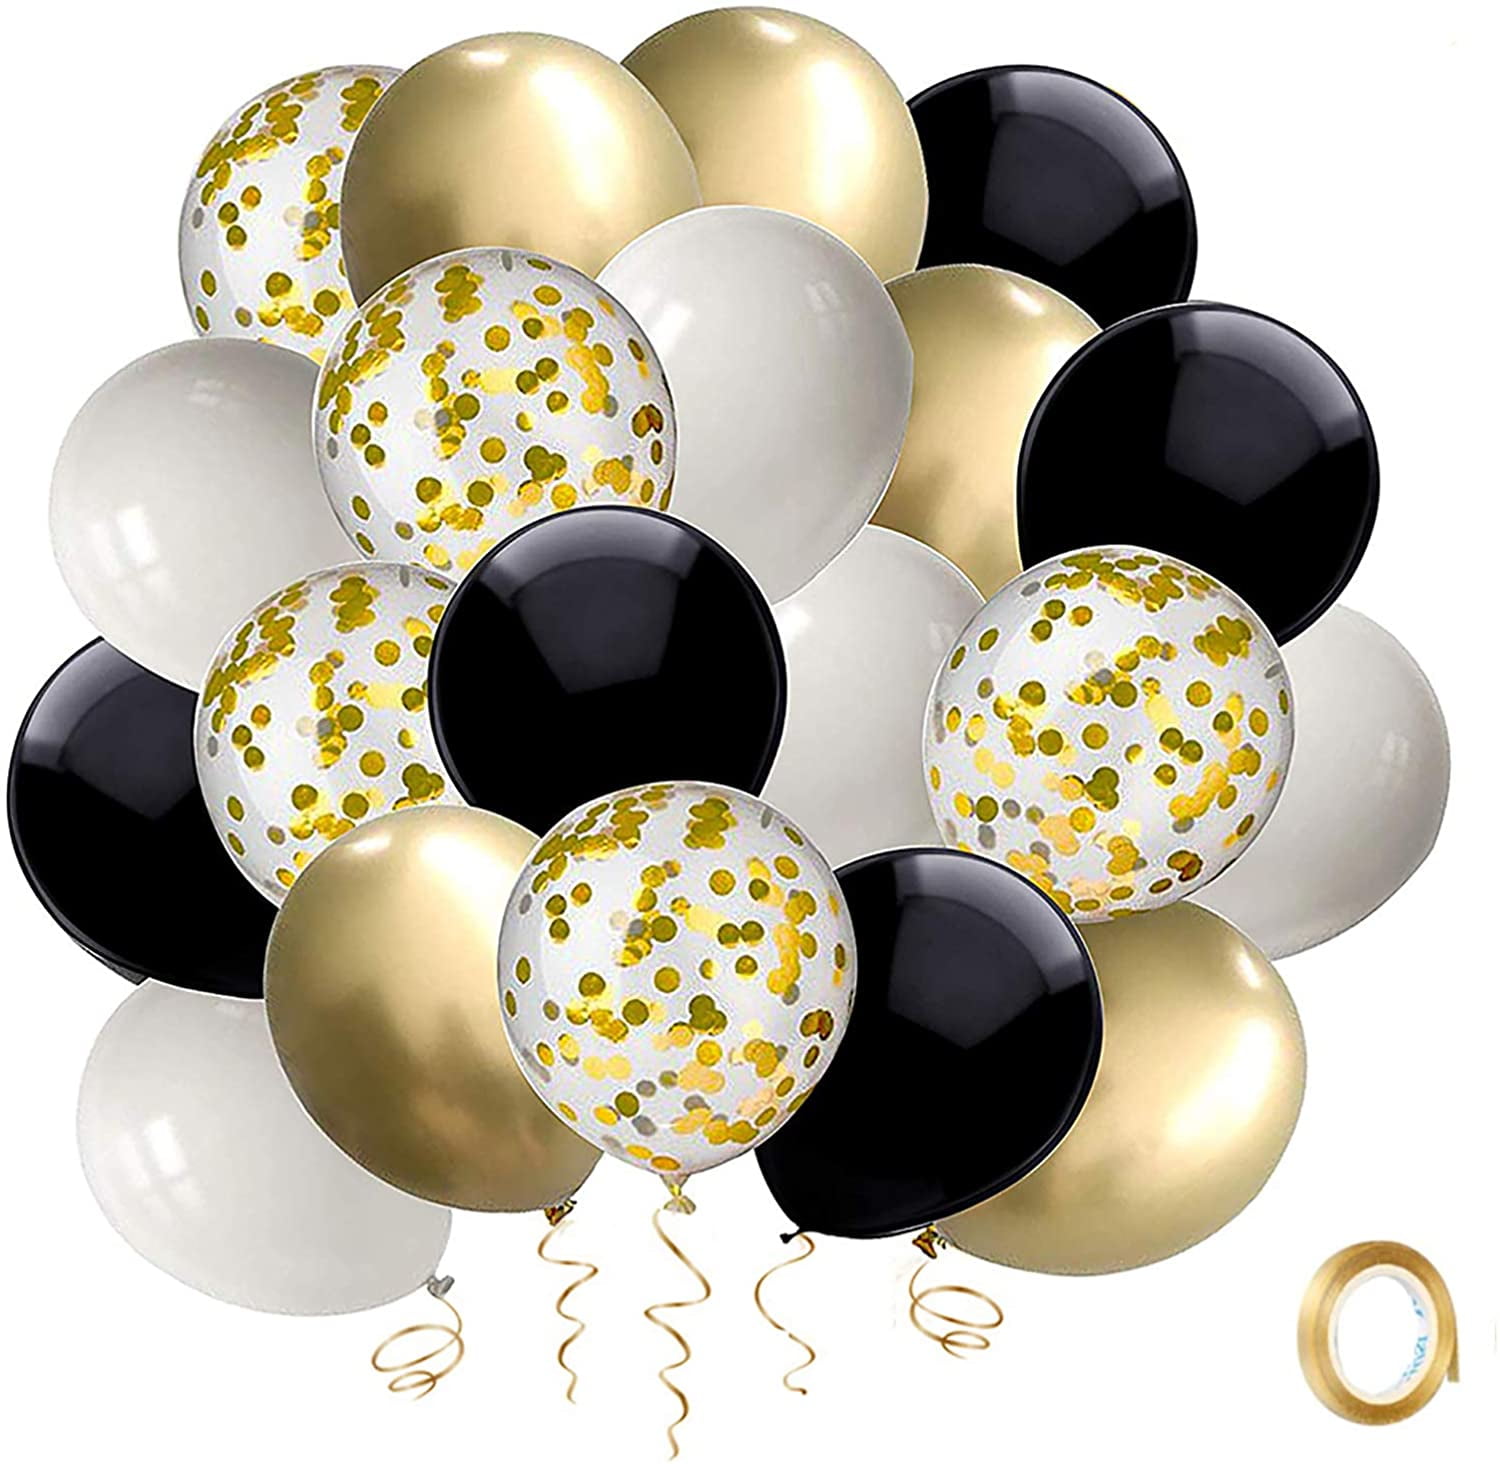 Anniversary Party Balloons 20 Pcs White & Confetti Latex Balloons 4 Creative Foil Balloons for Engagement Party Decorations